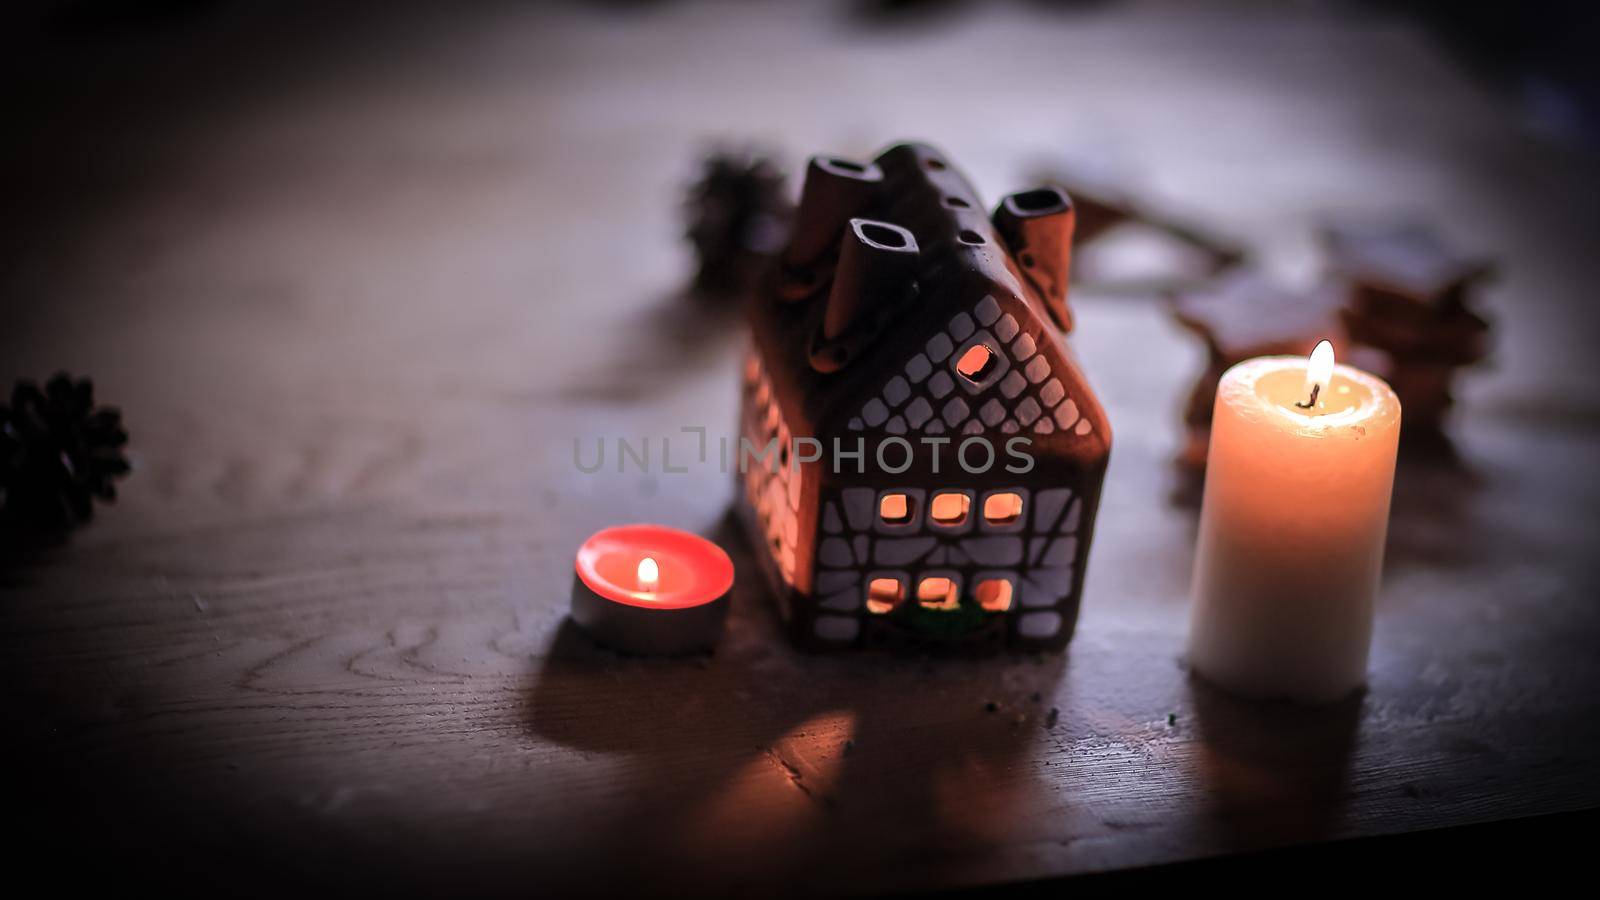 gingerbread house candle on blurred background of the table. by SmartPhotoLab